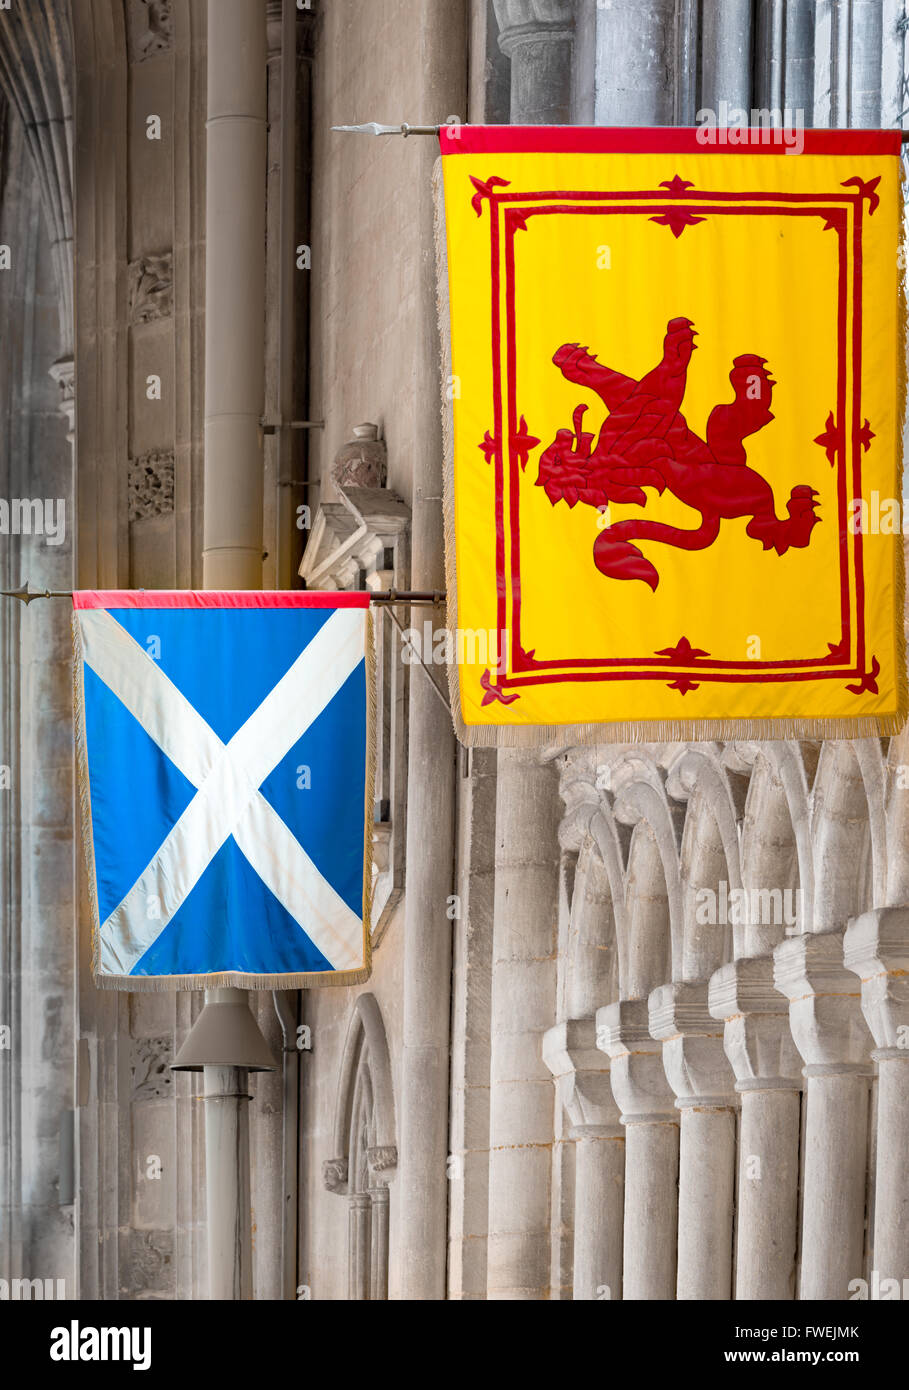 Flags next to the former tomb of Mary Stewart, queen of Scots (executed by Elizabeth I in 1587) at Peterborough cathedral. Stock Photo